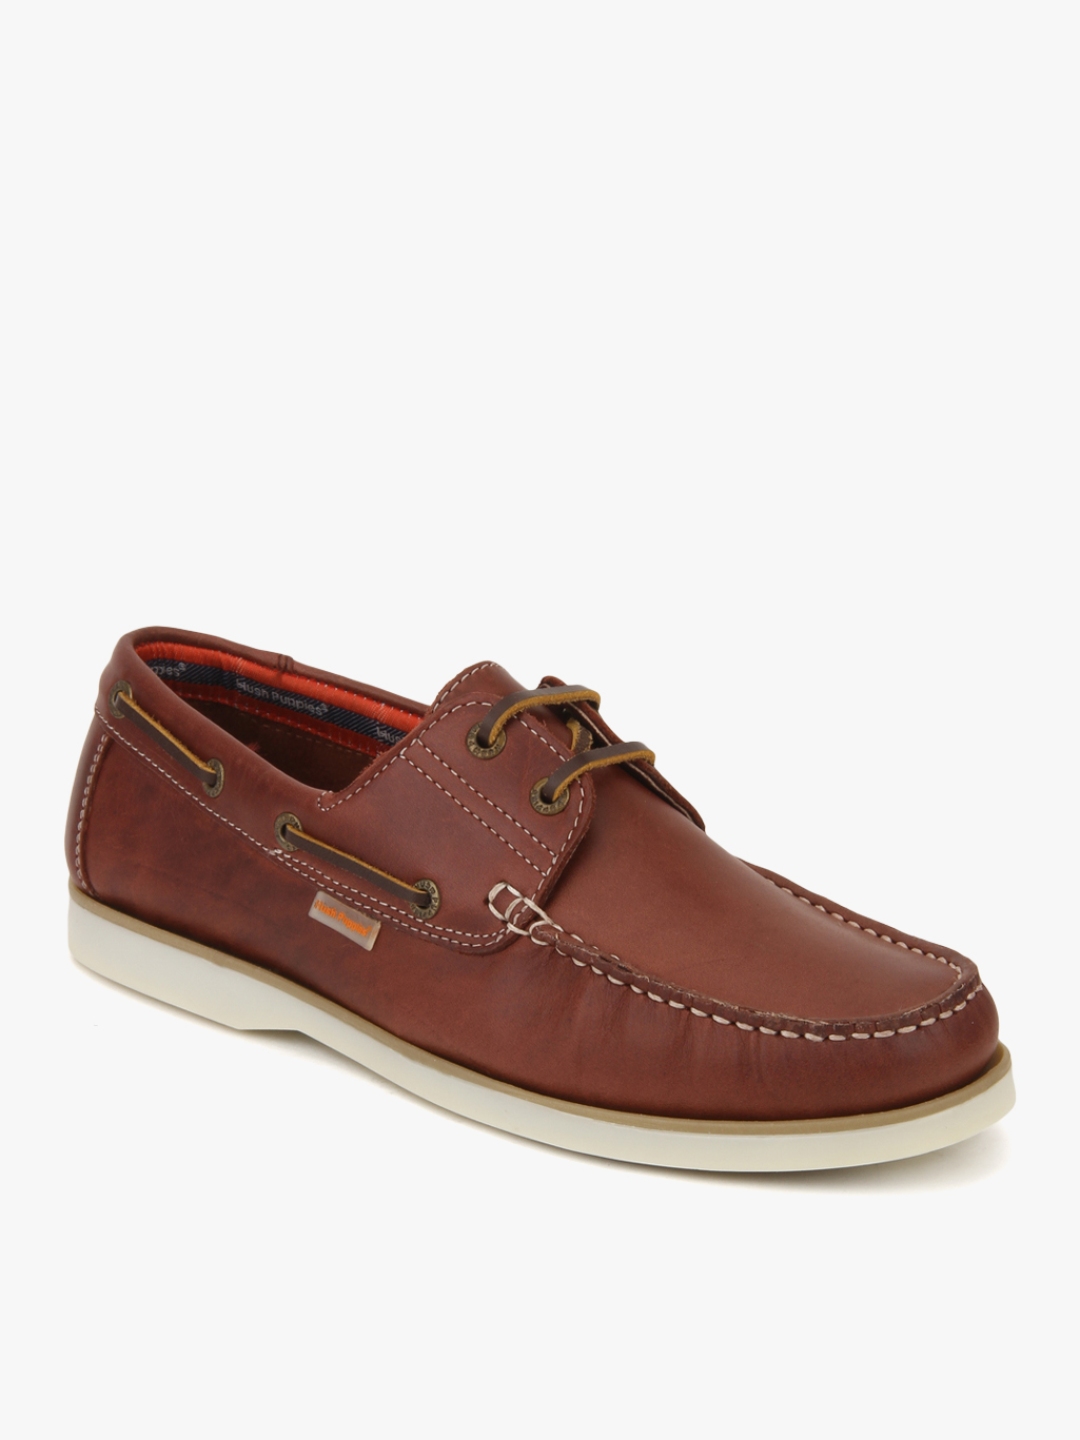 Buy Brown Boat Shoes - Casual Shoes for Men 7925039 | Myntra